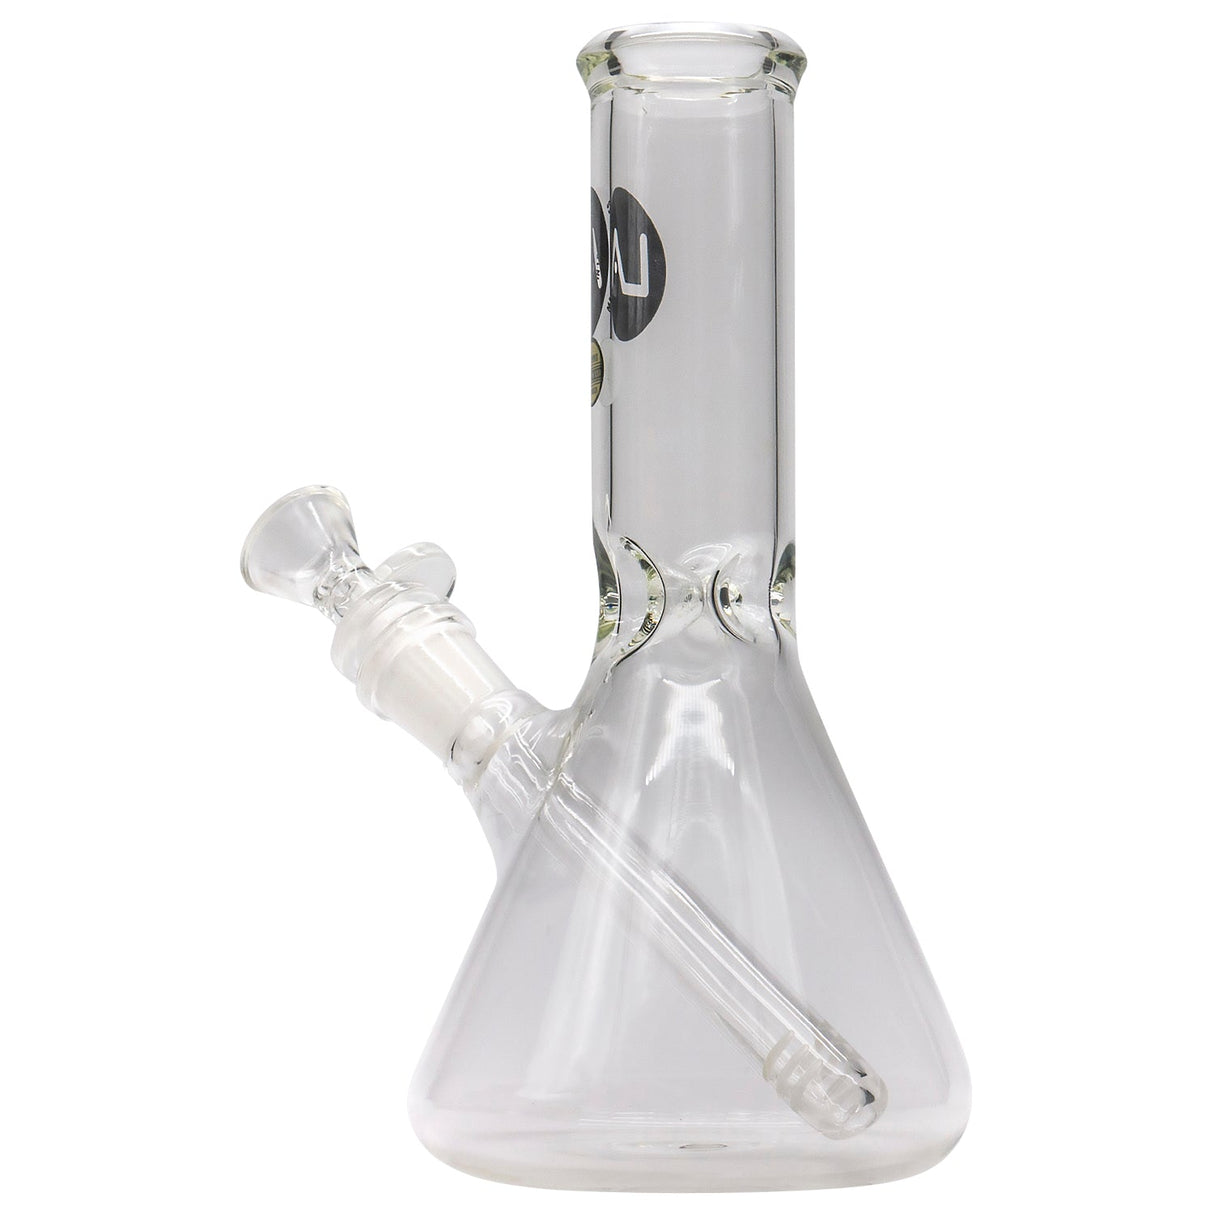 LA Pipes "Right Hand" Basic Beaker Water Pipe